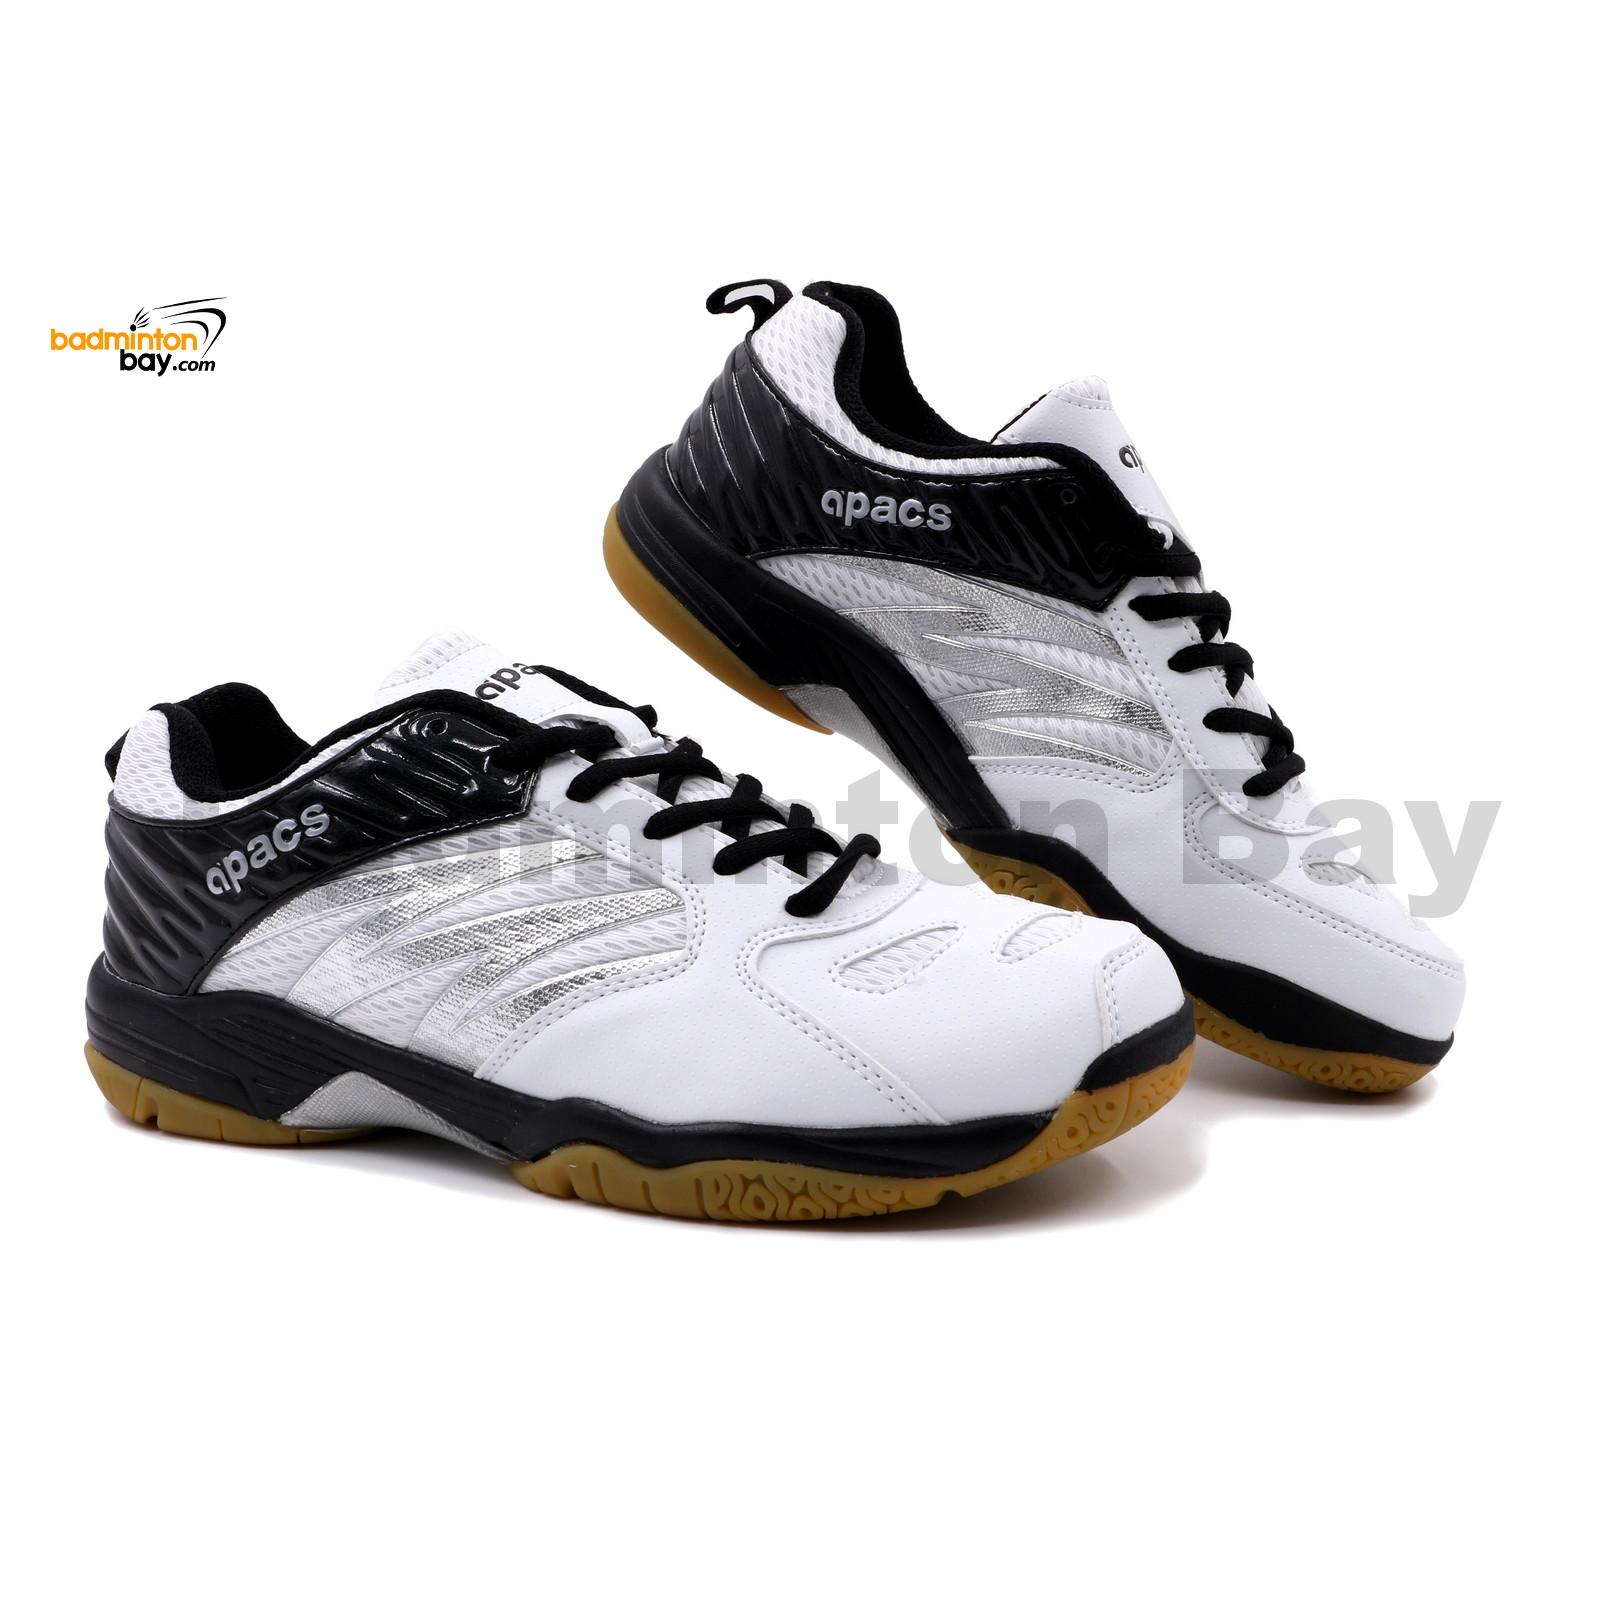 Apacs Cushion Power SP-601 White Black Badminton Shoes With Improved ...